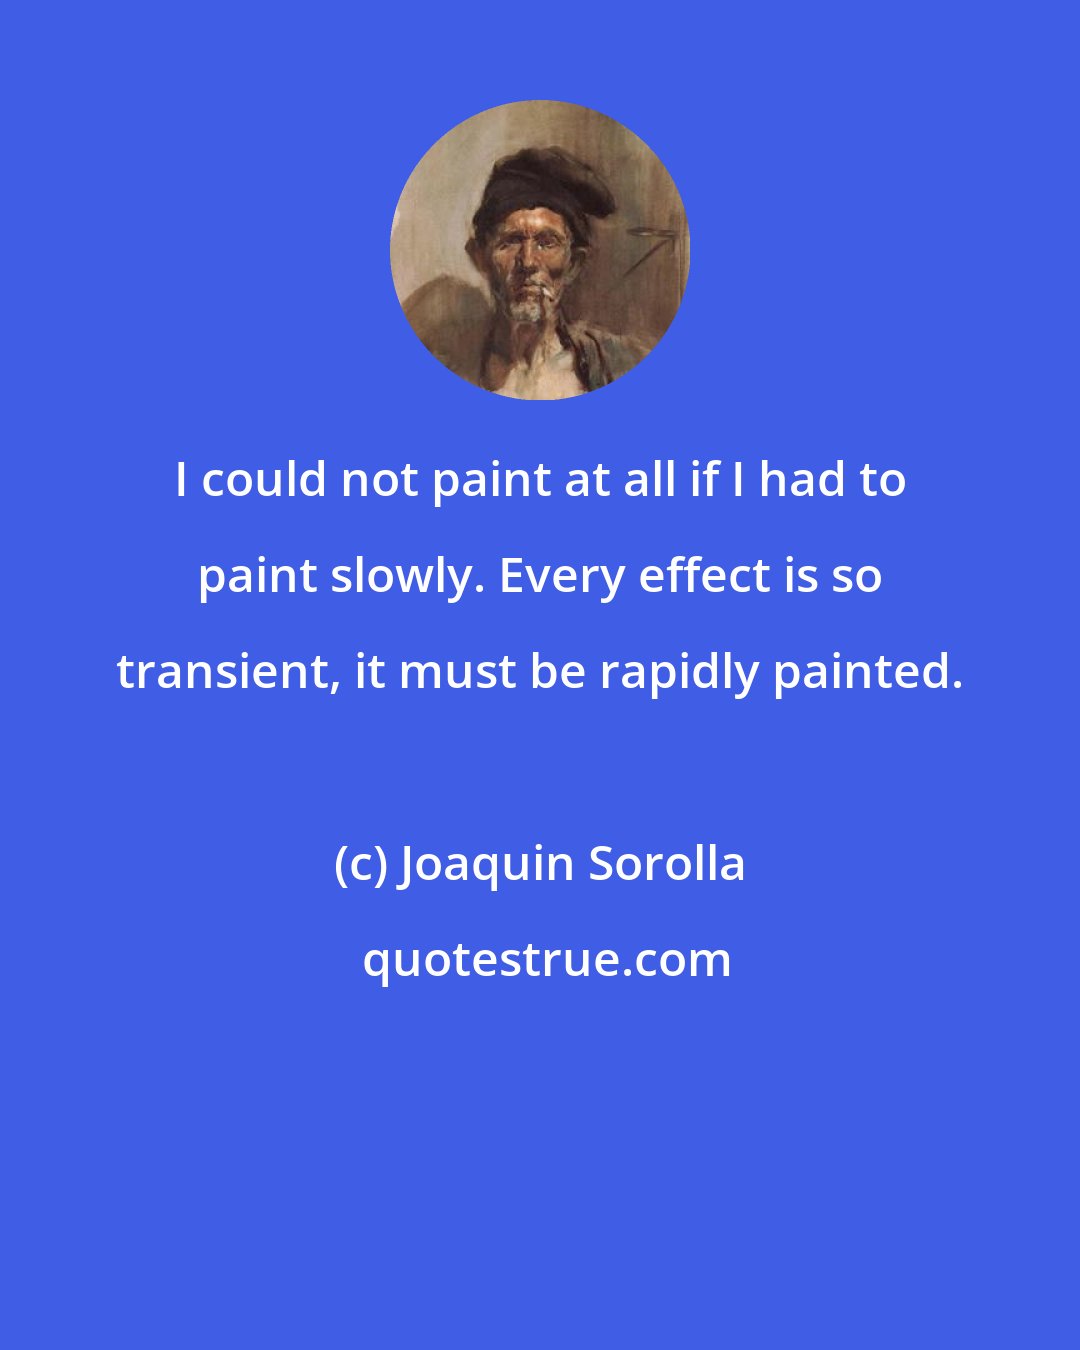 Joaquin Sorolla: I could not paint at all if I had to paint slowly. Every effect is so transient, it must be rapidly painted.